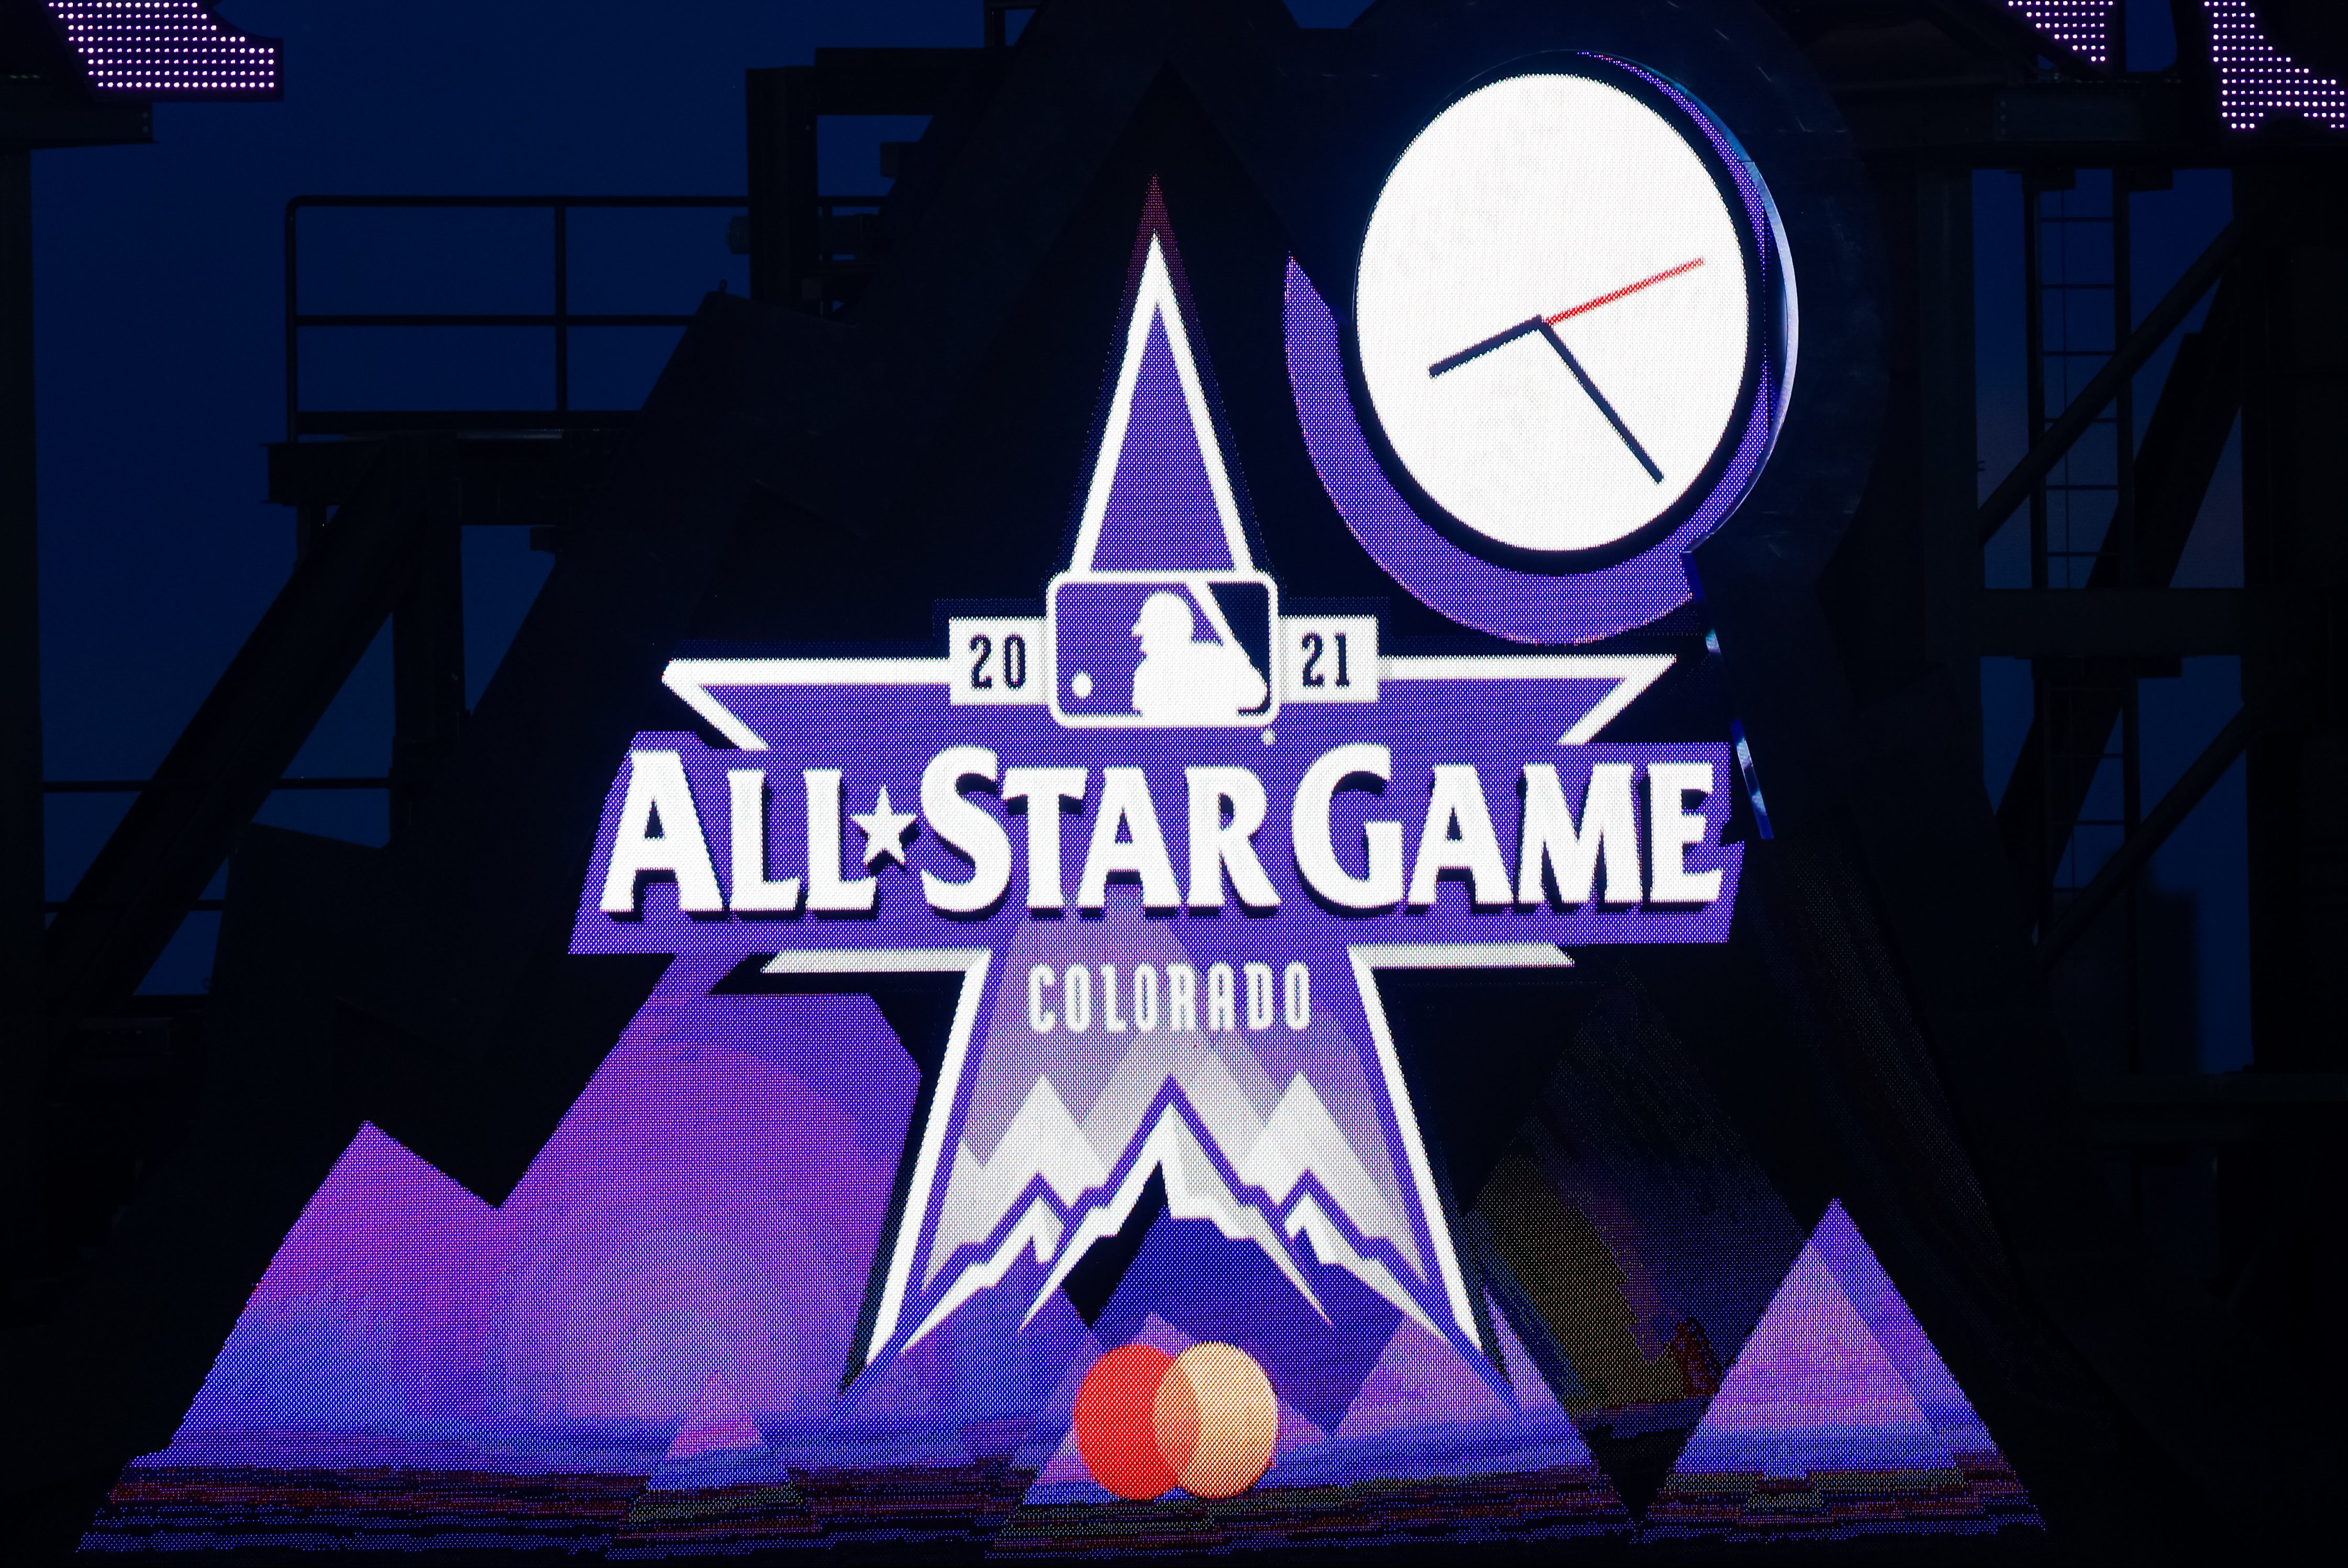 The MLB All-Star Game logo for the 2021 game being held in Colorado at Coors Field, the home of the Rockies